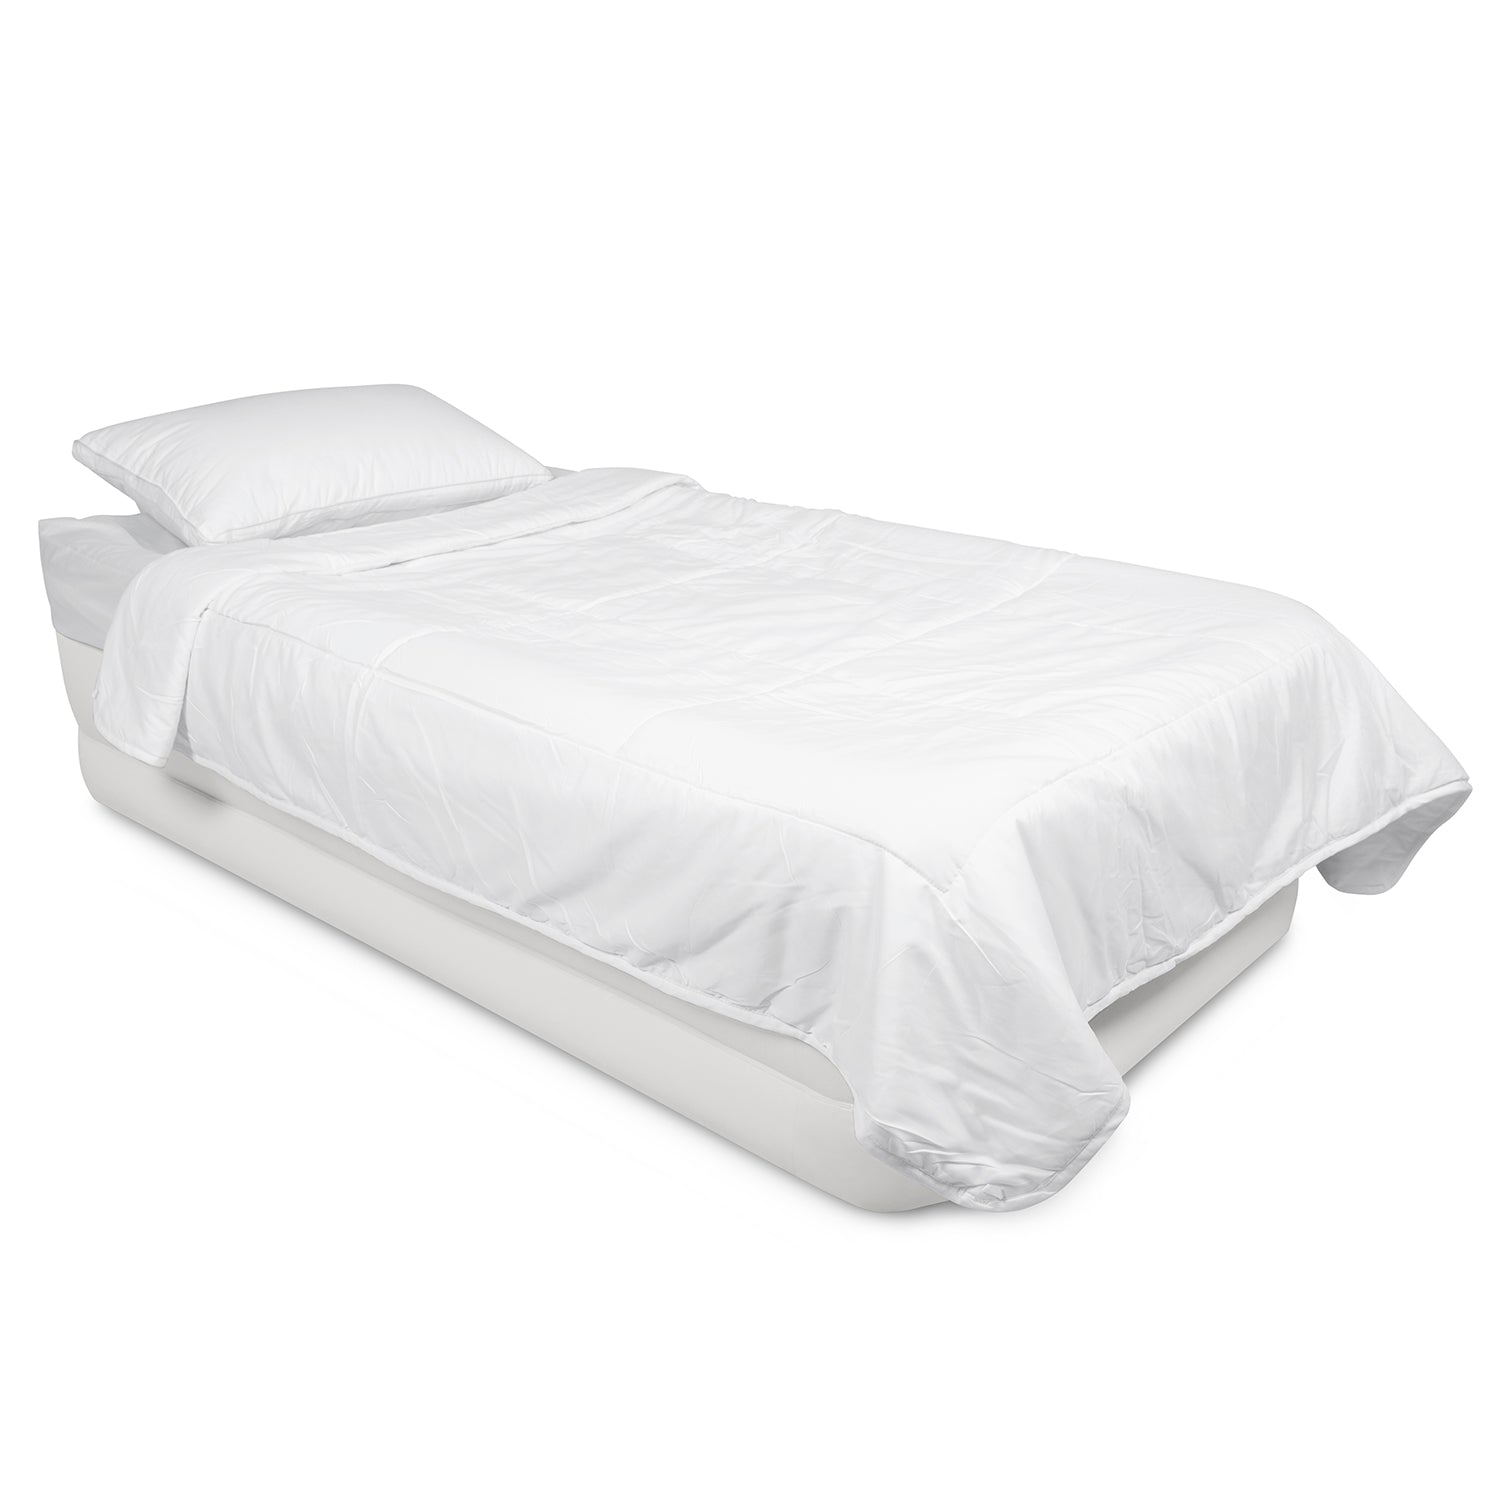 Aerobed Twin Insulated Mattress Cover - White